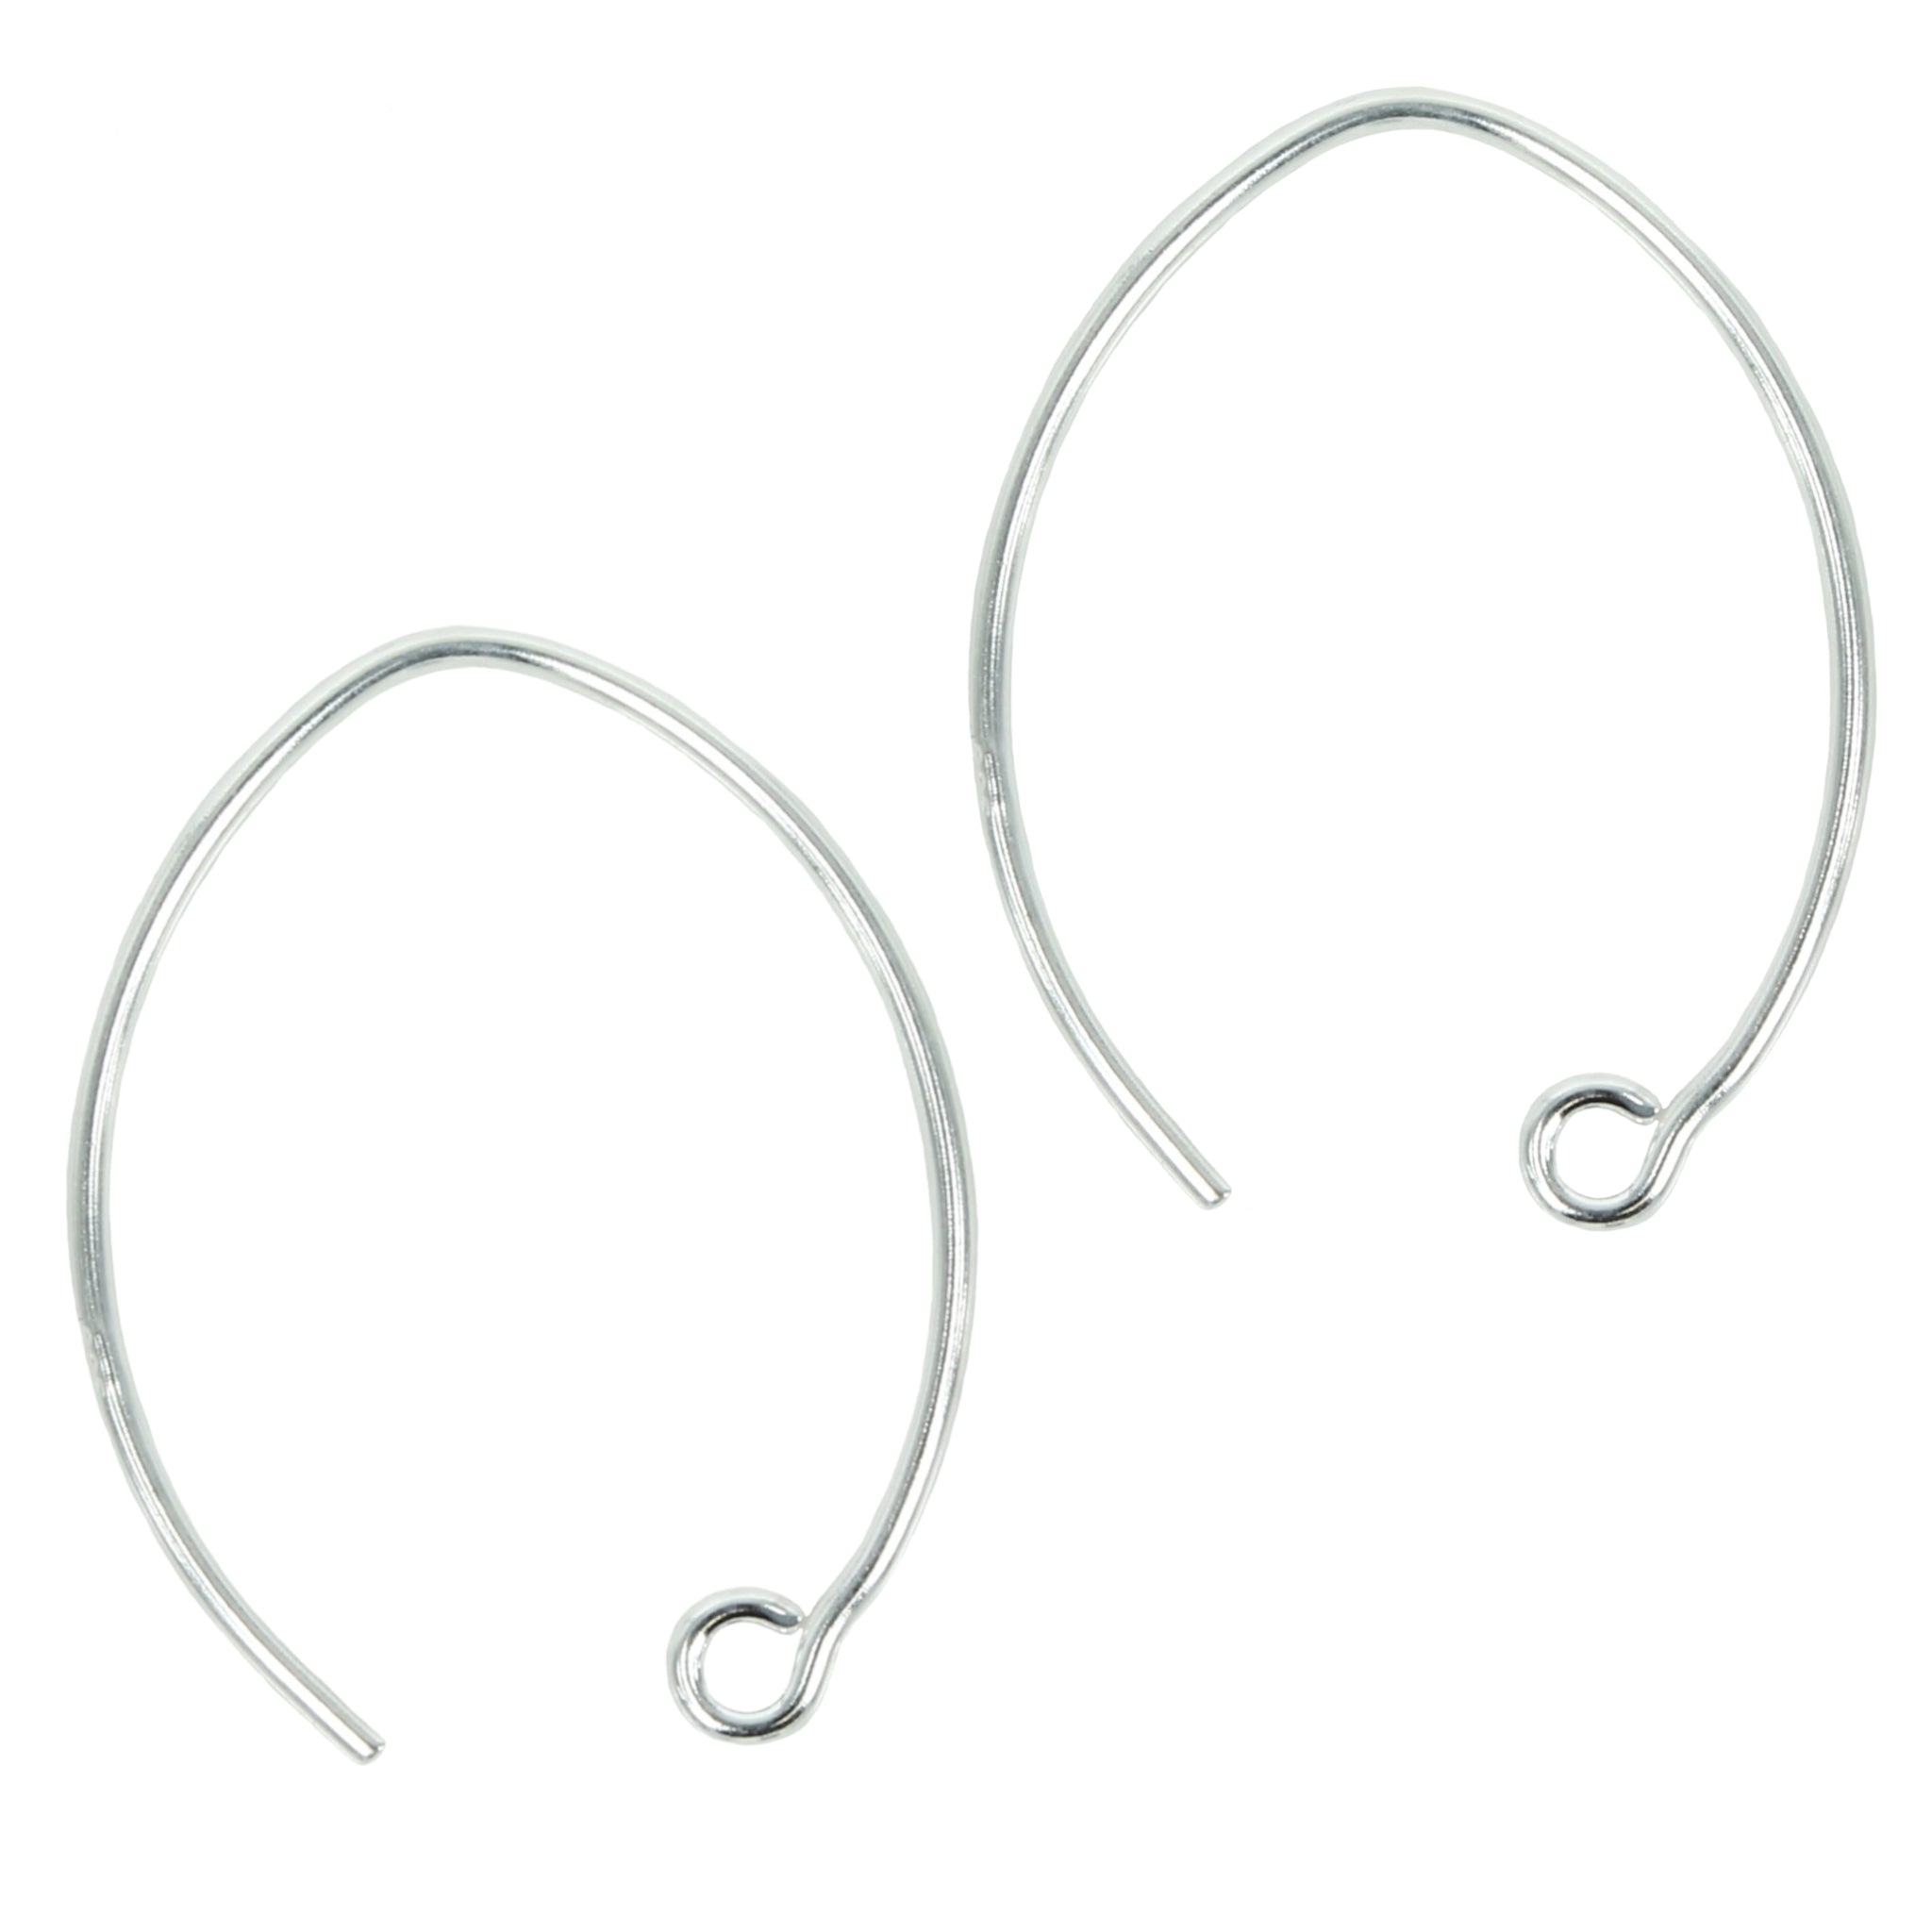 Earwires with Oval Shape in Sterling Silver 25x19mm - 20 Gauge